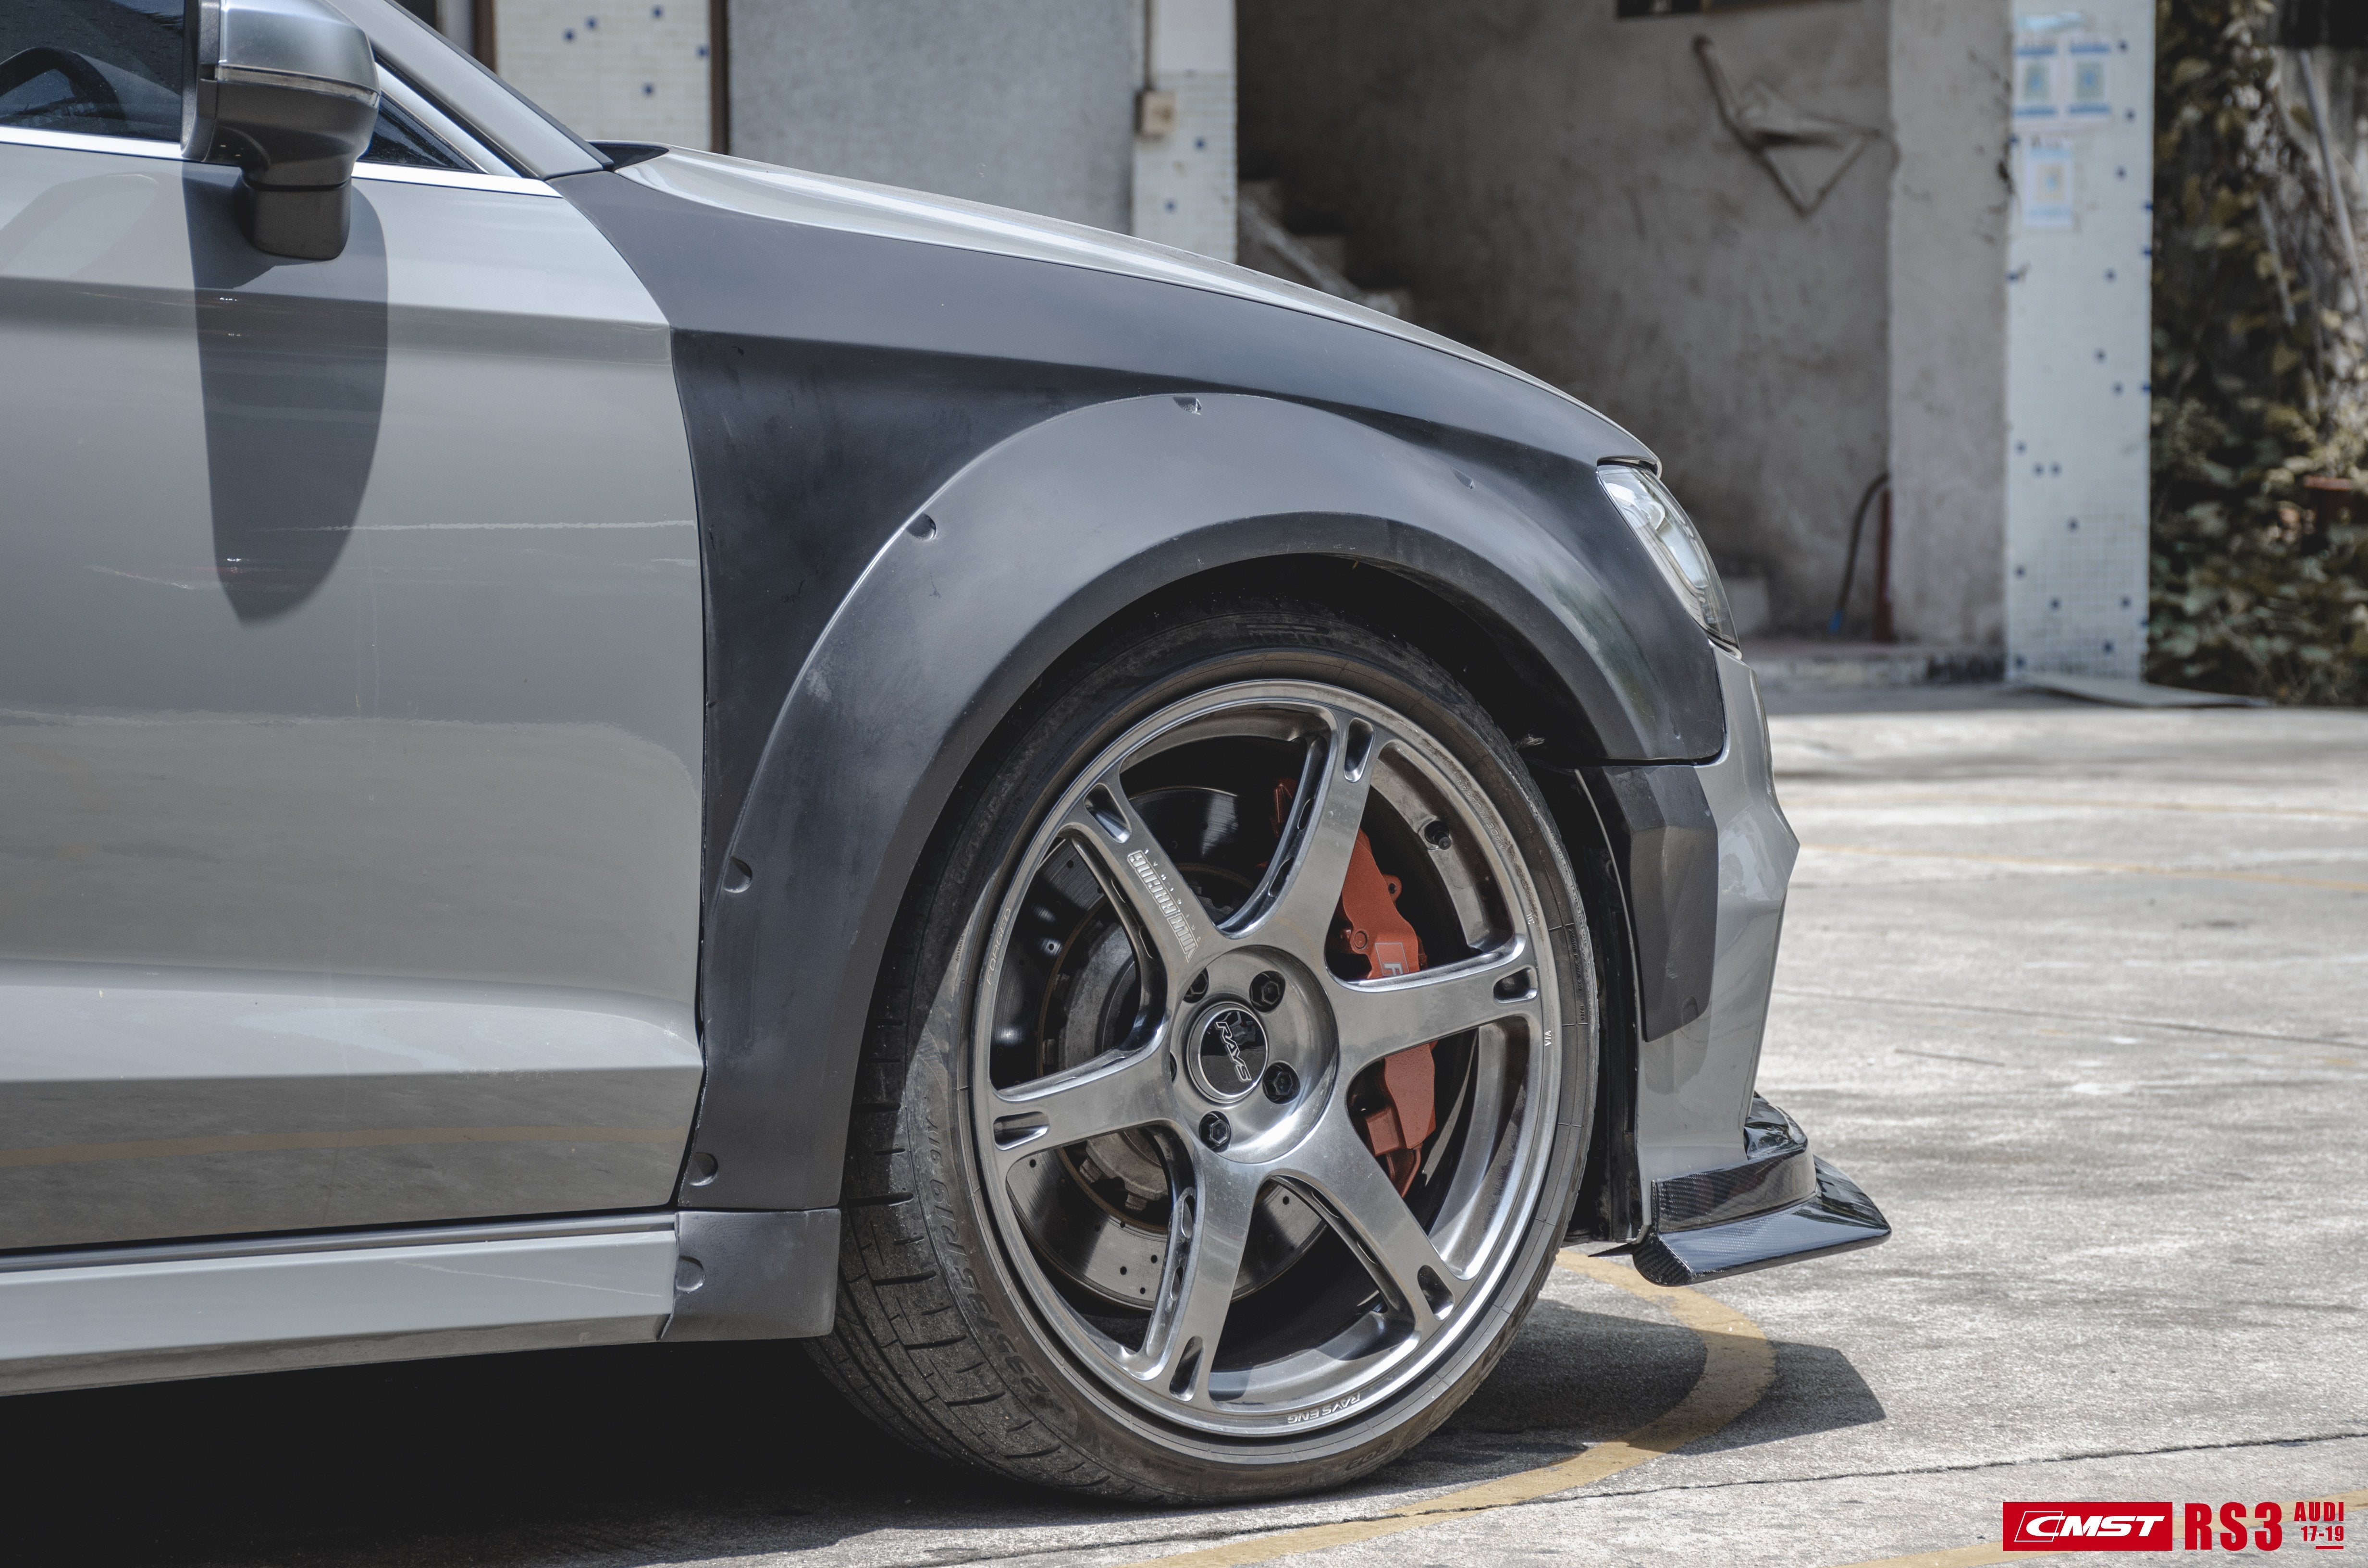 New Release!! CMST Tuning Carbon Fiber Widebody Fender Arches ( 12 Pcs ) for Audi RS3 2014-ON